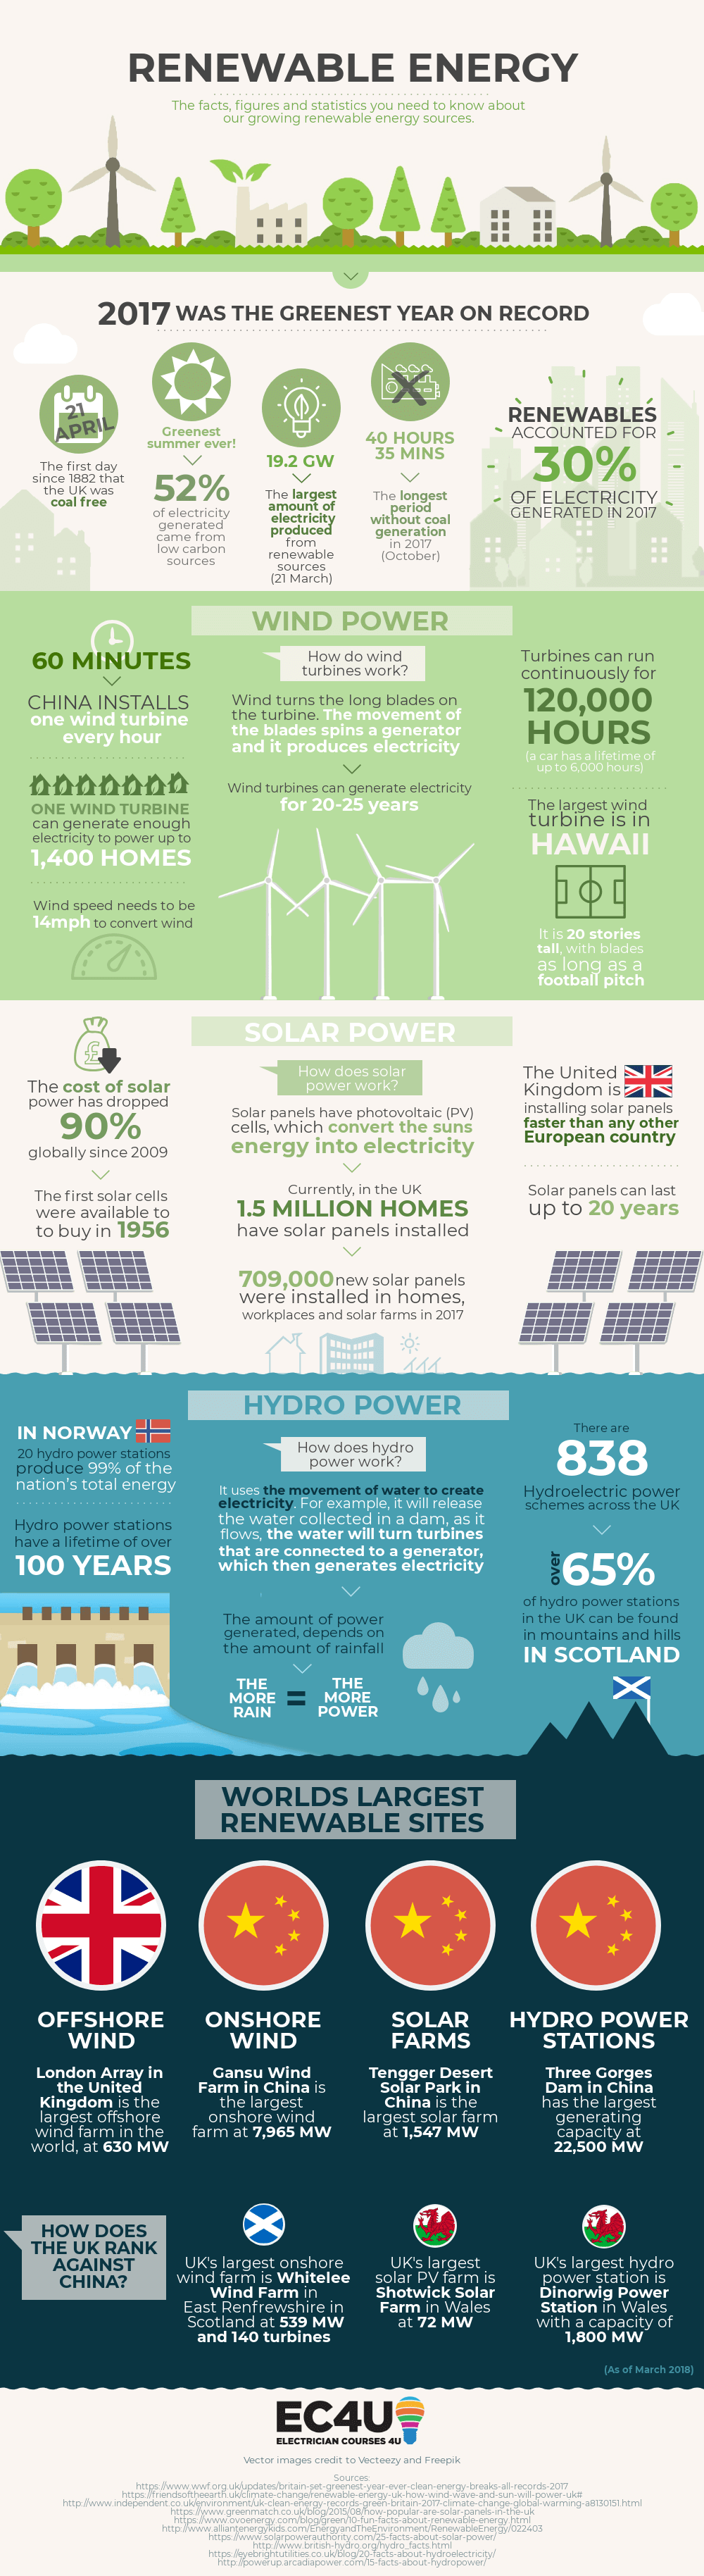 renewable energy facts and statistics